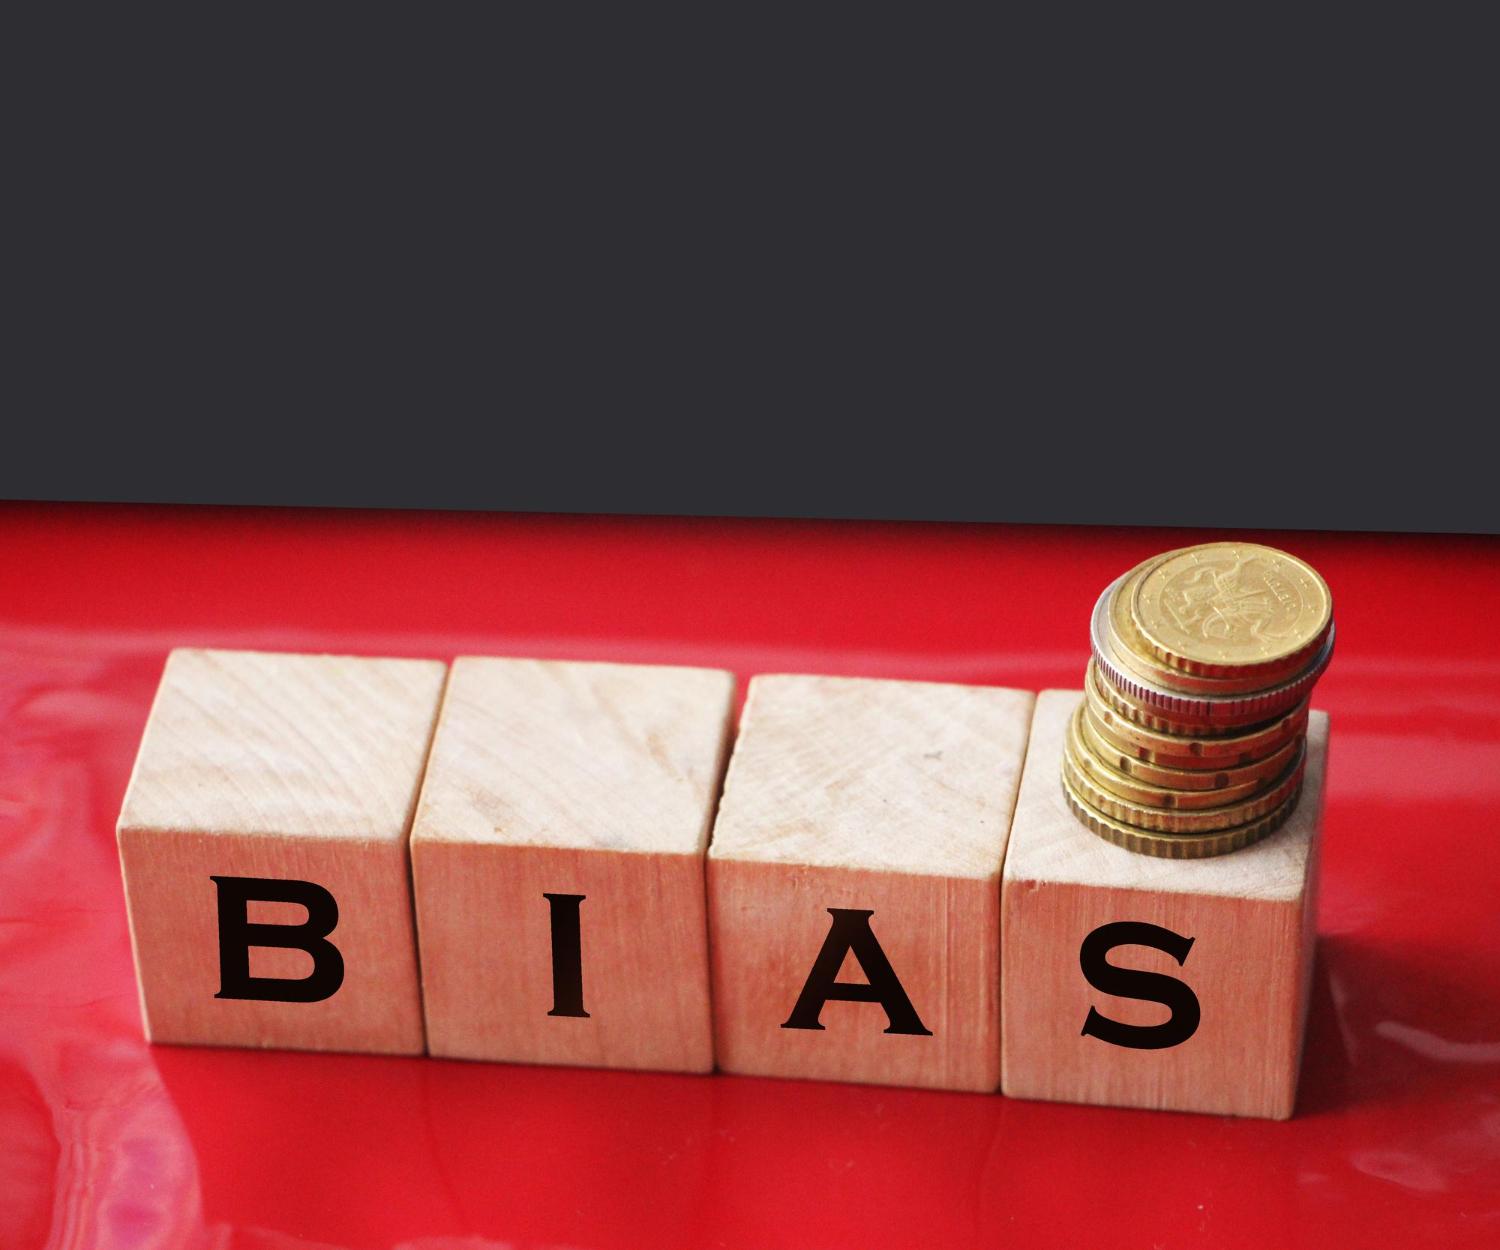 Financial biases that may impact your decision-making